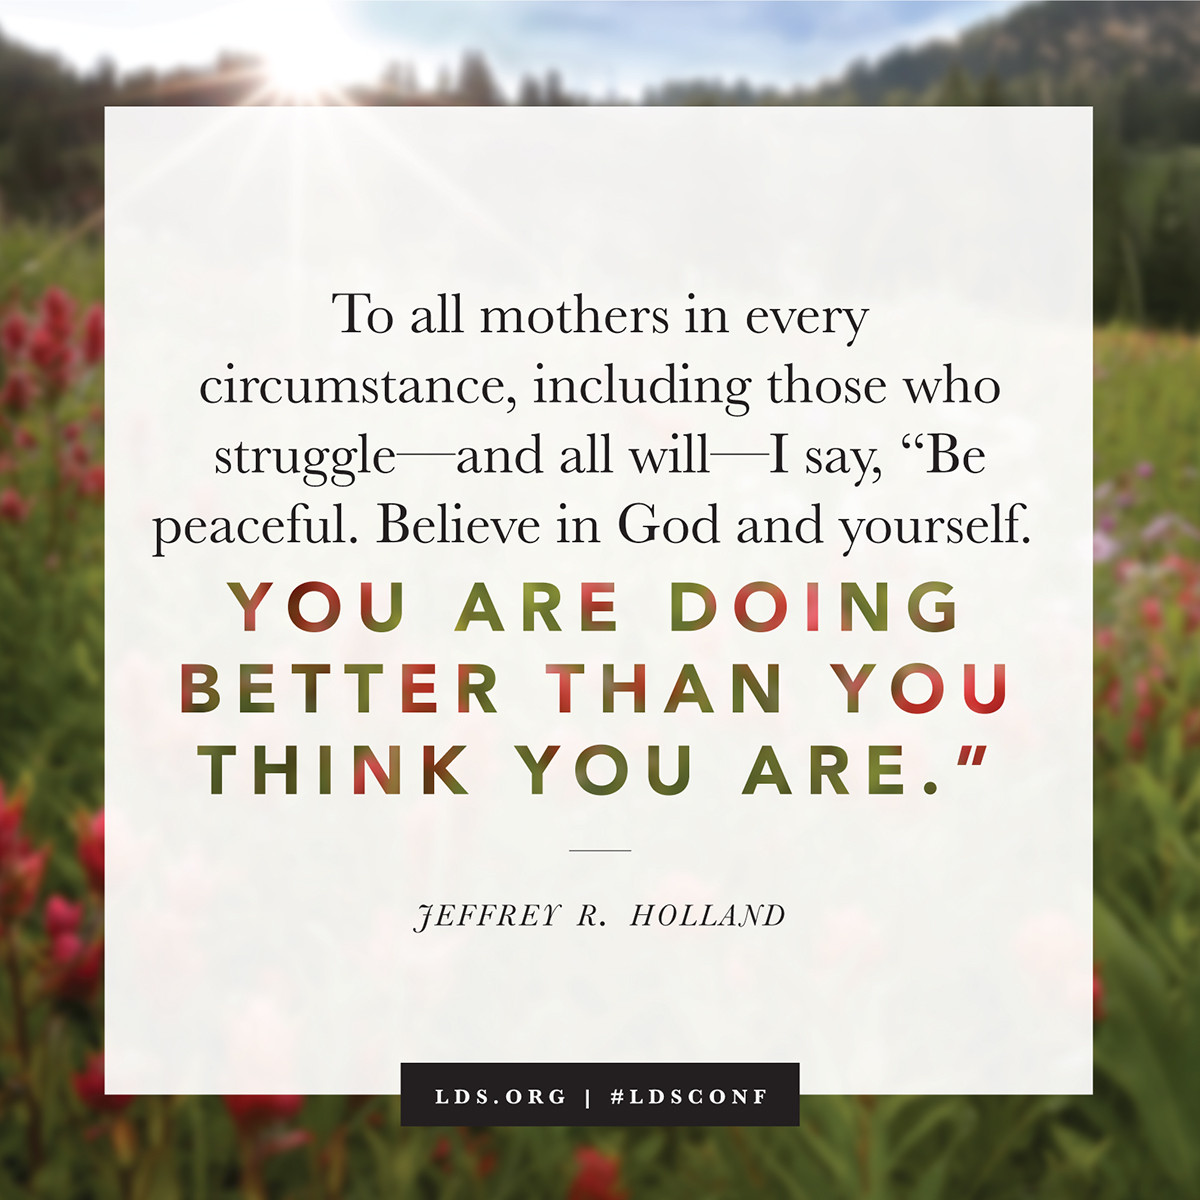 Lds Quotes About Motherhood
 You Are Doing Better Than You Think